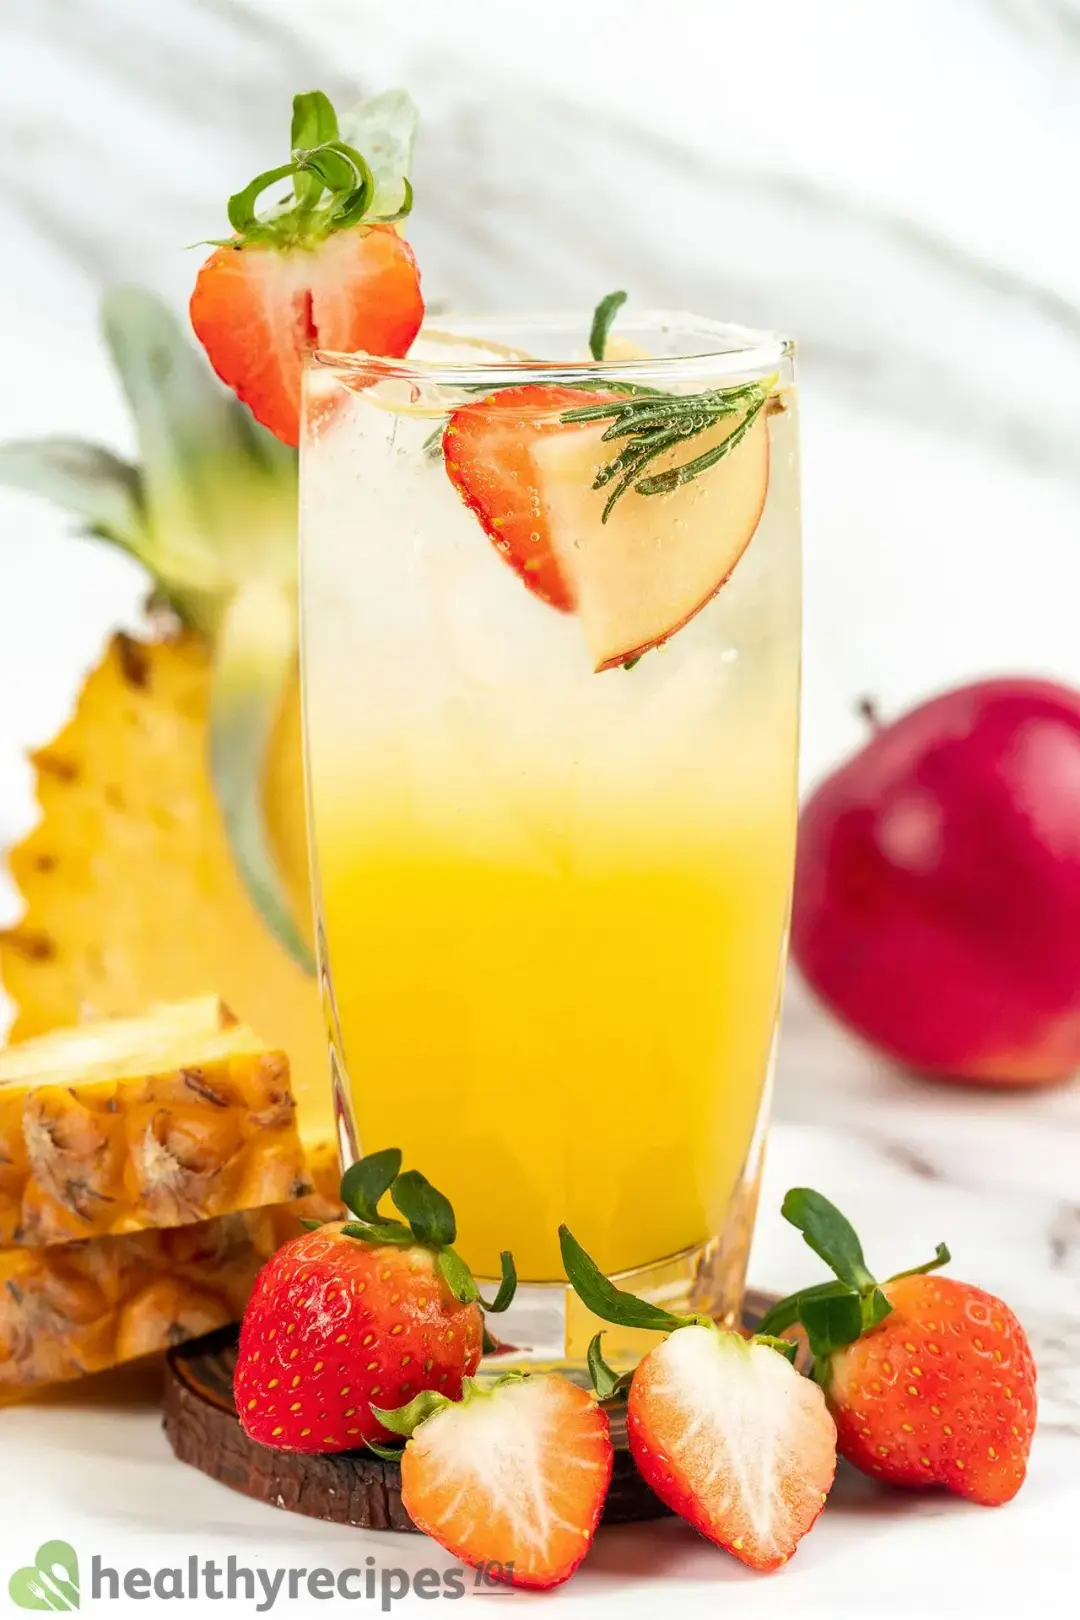 A tall glass of orange jungle juice cocktail with strawberries inside and around, next to pineapples and apples